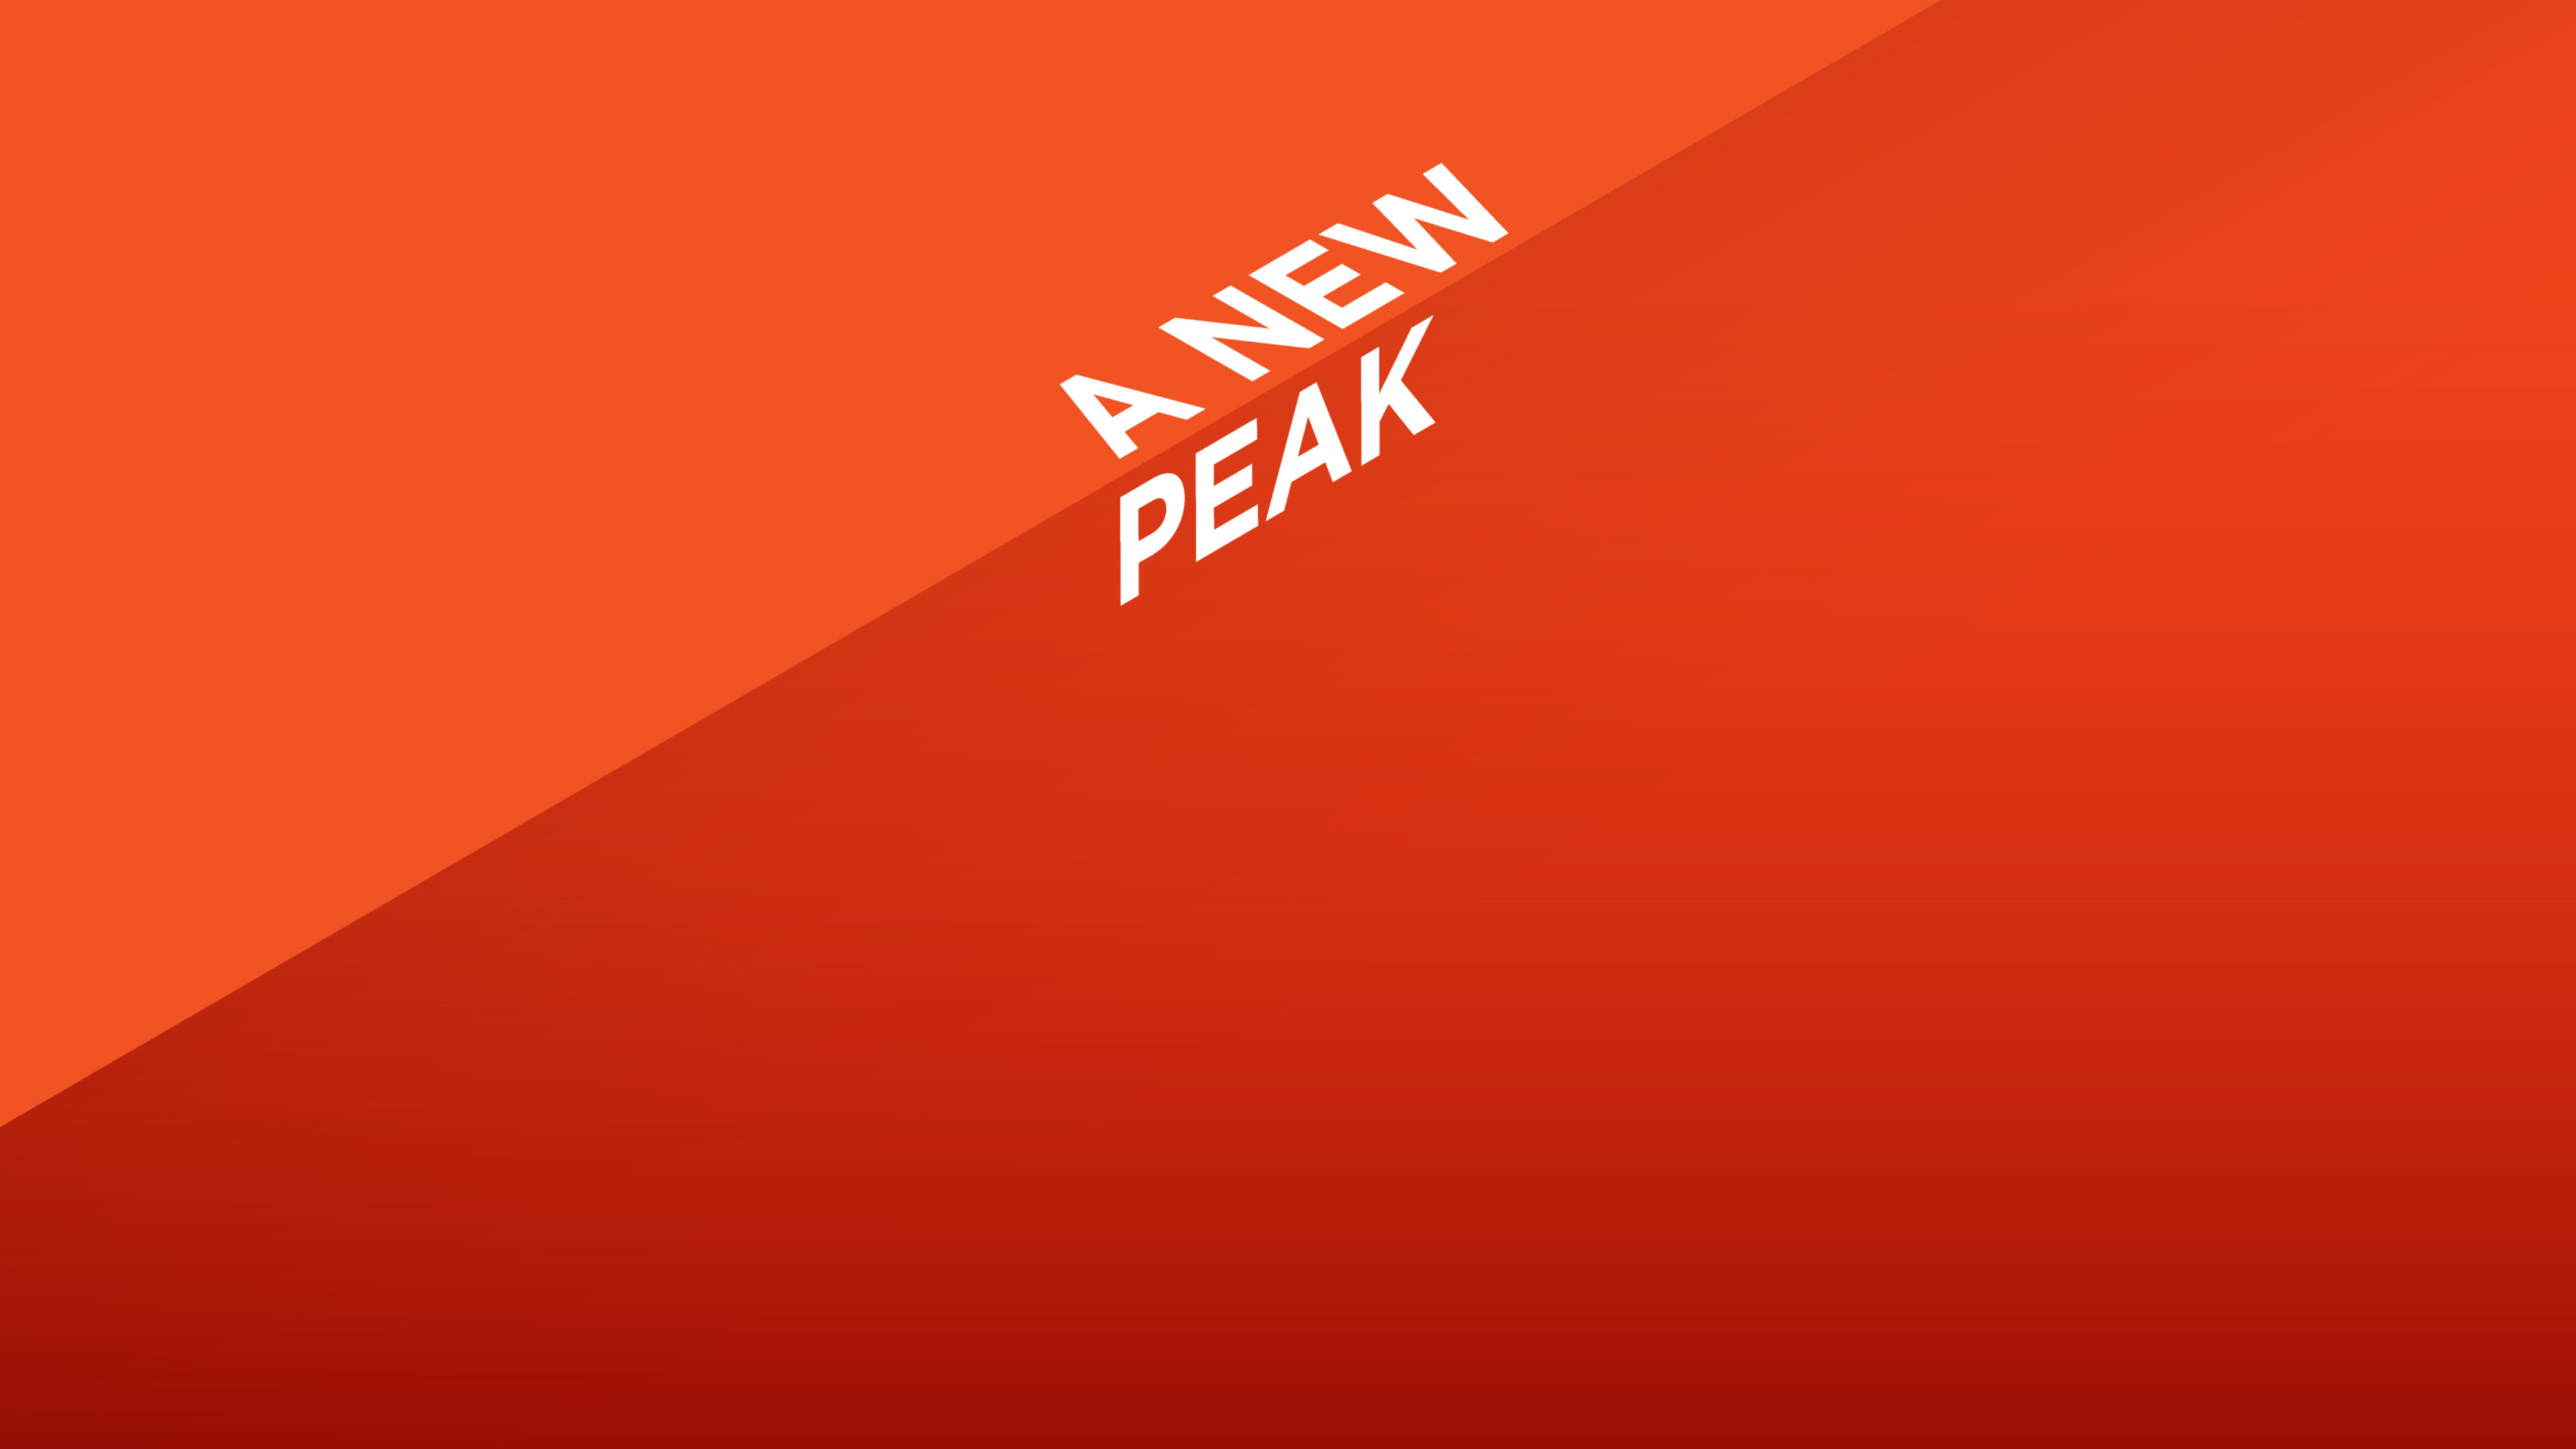 The words "A New Peak" are rendered in uppercase sans serif font and rendered at a dimensional angle as artwork.